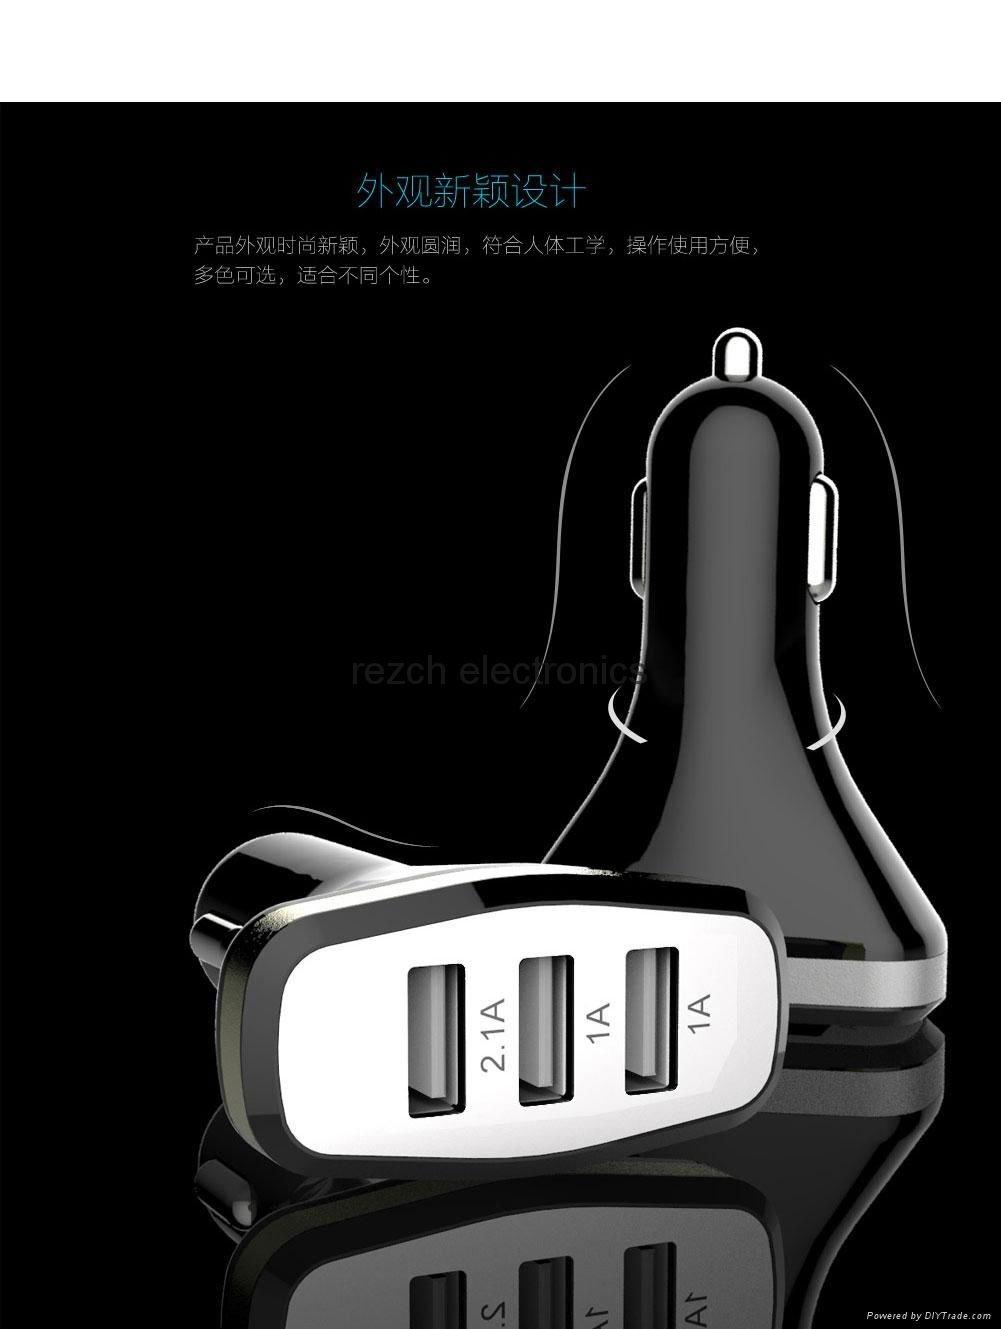 3.1A 3 USB Car Charger for iPhone 4